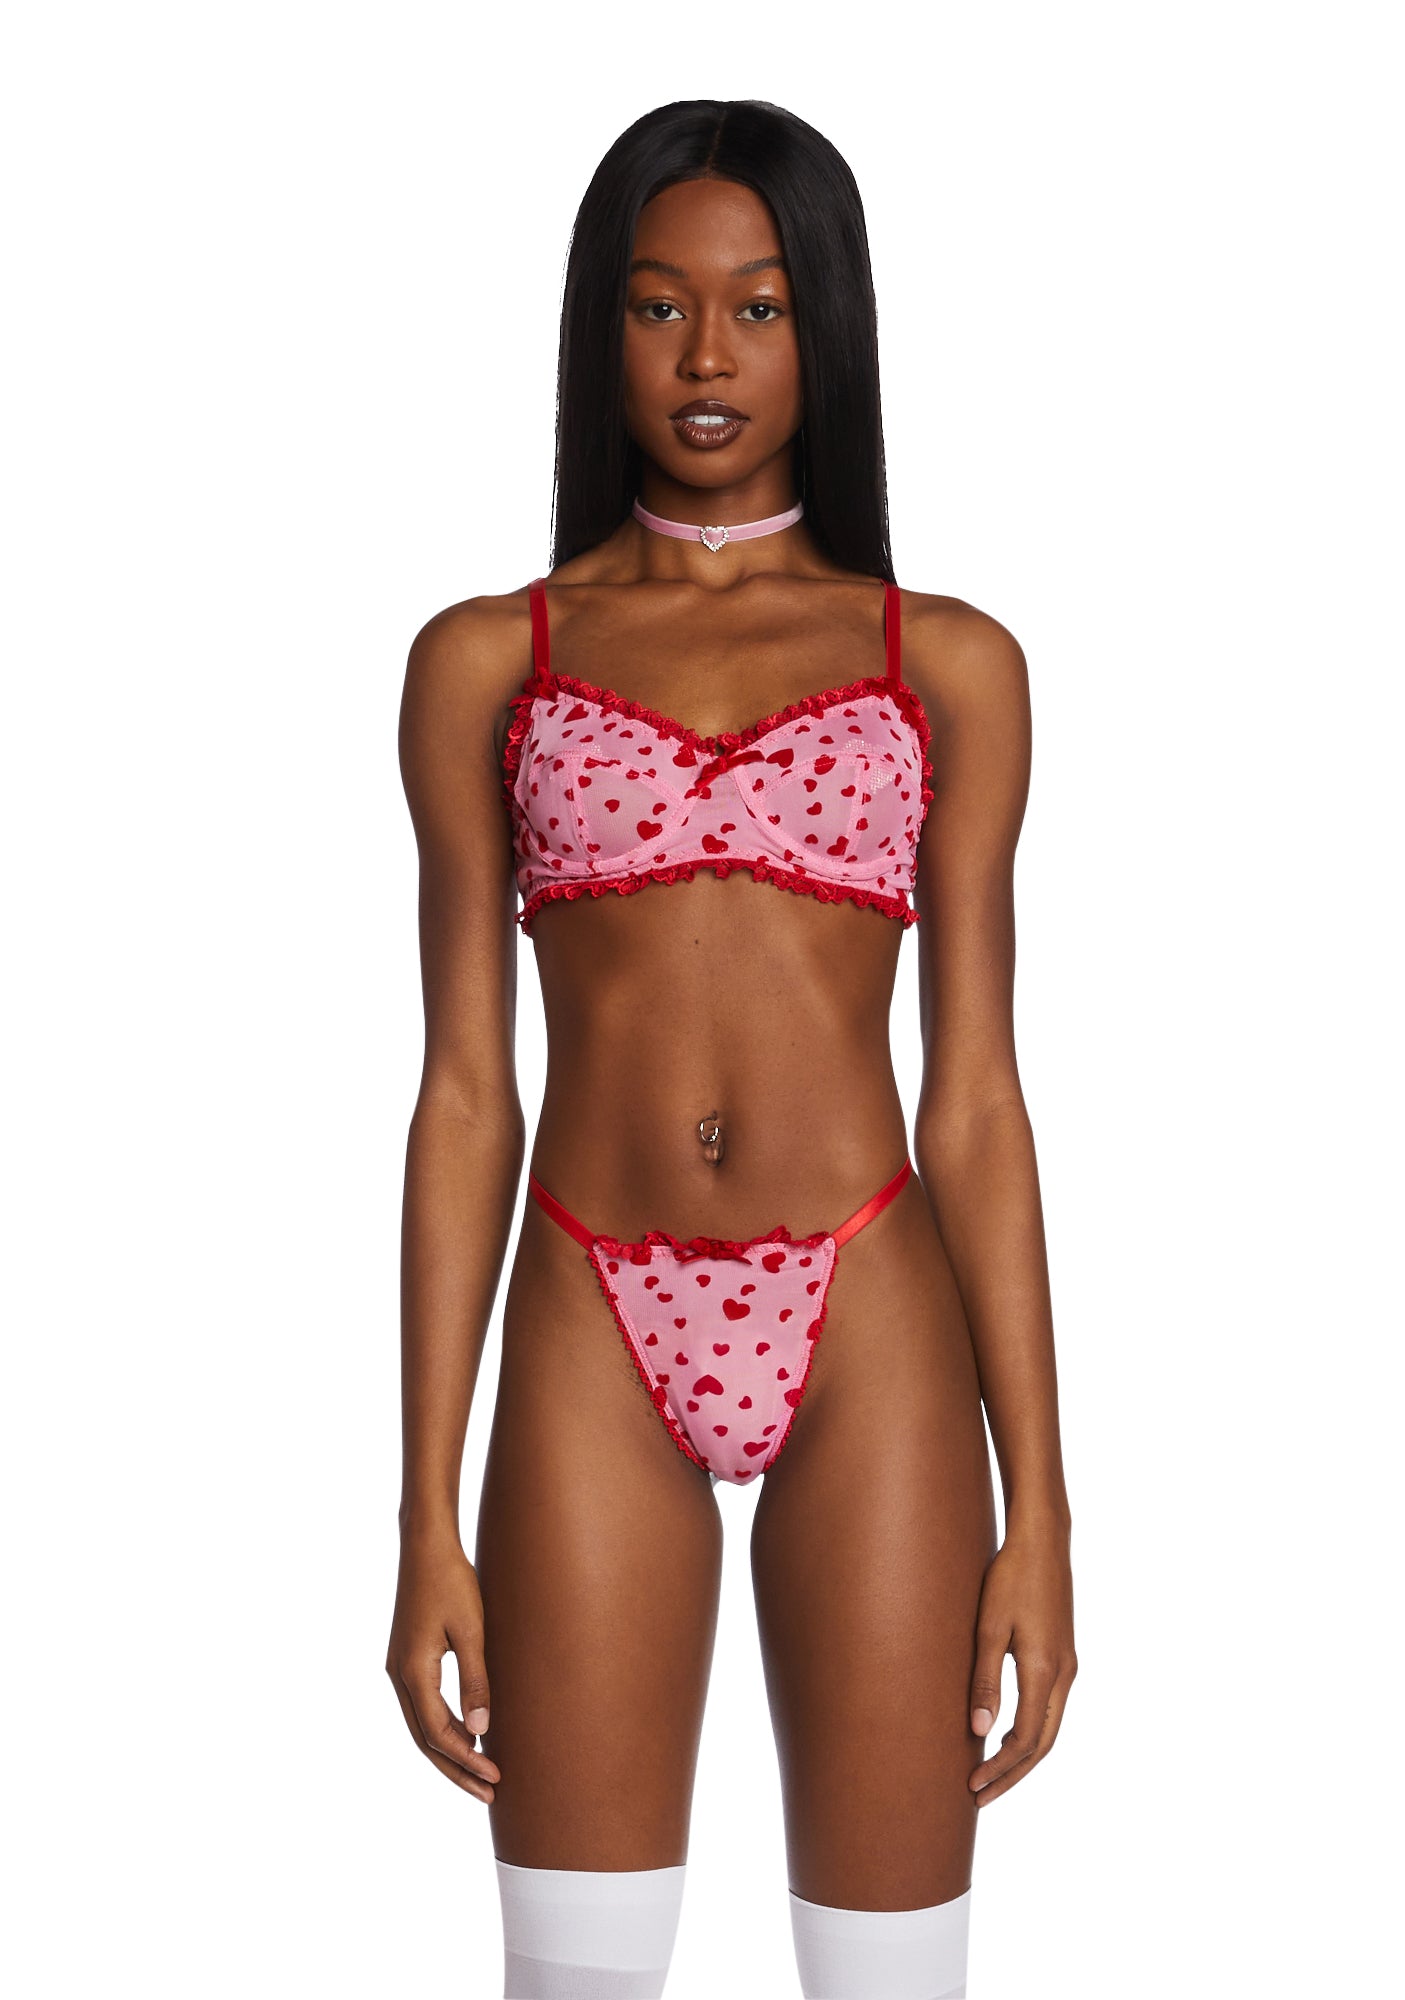 Buy Candy Bra & Candy G-string. Weird and funny stuff online